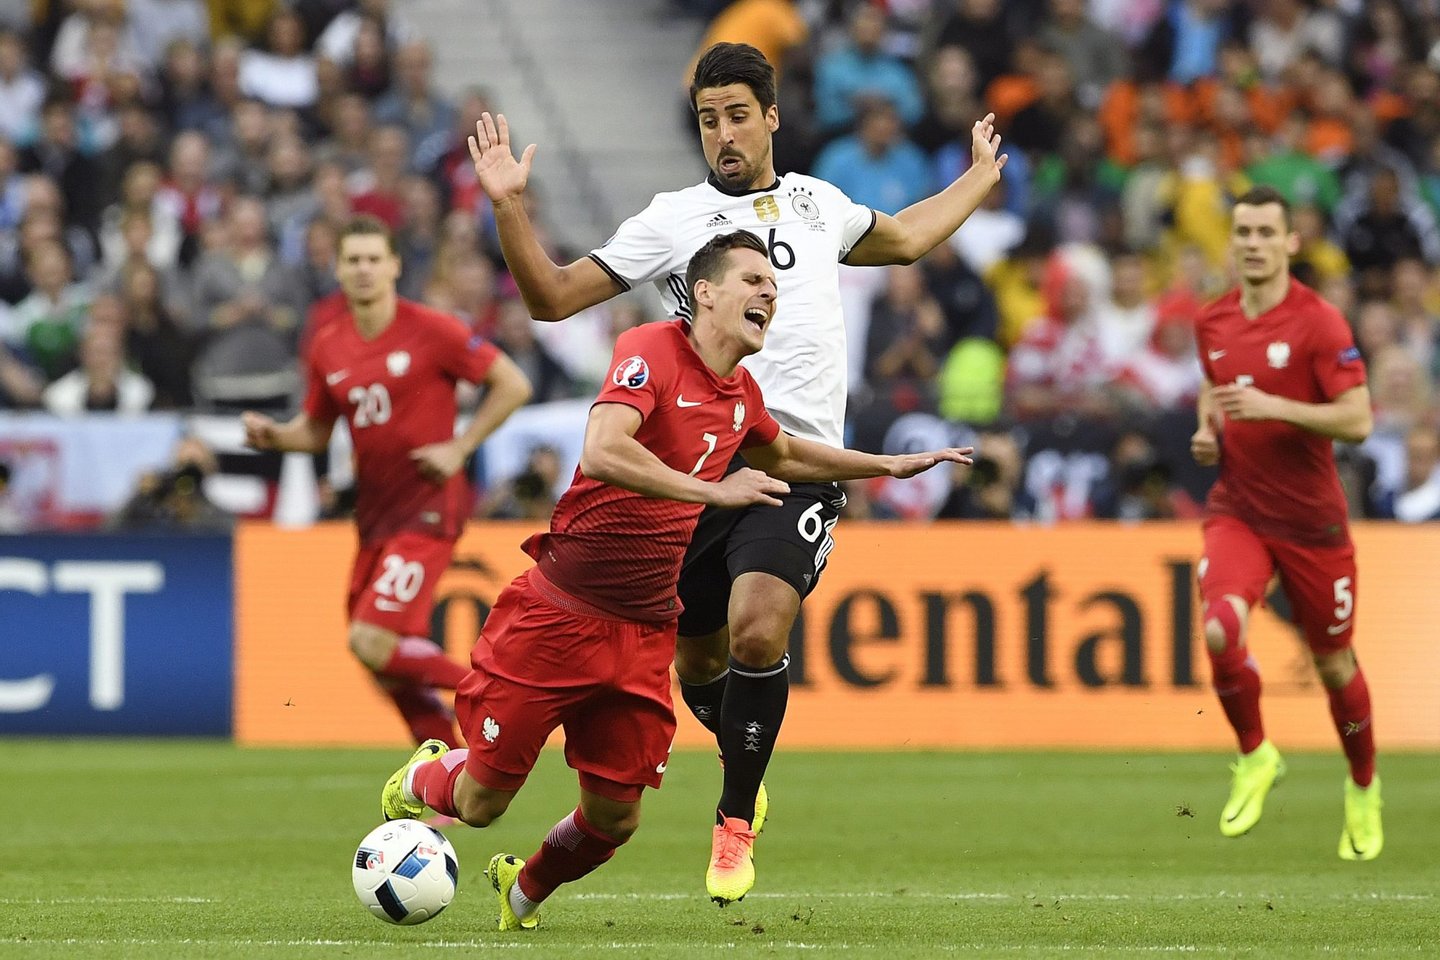 Germany's midfielder Sami Khedira (C-R) commits a foul on Poland's forward Arkadiusz Milik during the Euro 2016 group C football match between Germany and Poland at the Stade de France stadium in Saint-Denis near Paris on June 16, 2016. / AFP / MIGUEL MEDINA (Photo credit should read MIGUEL MEDINA/AFP/Getty Images)